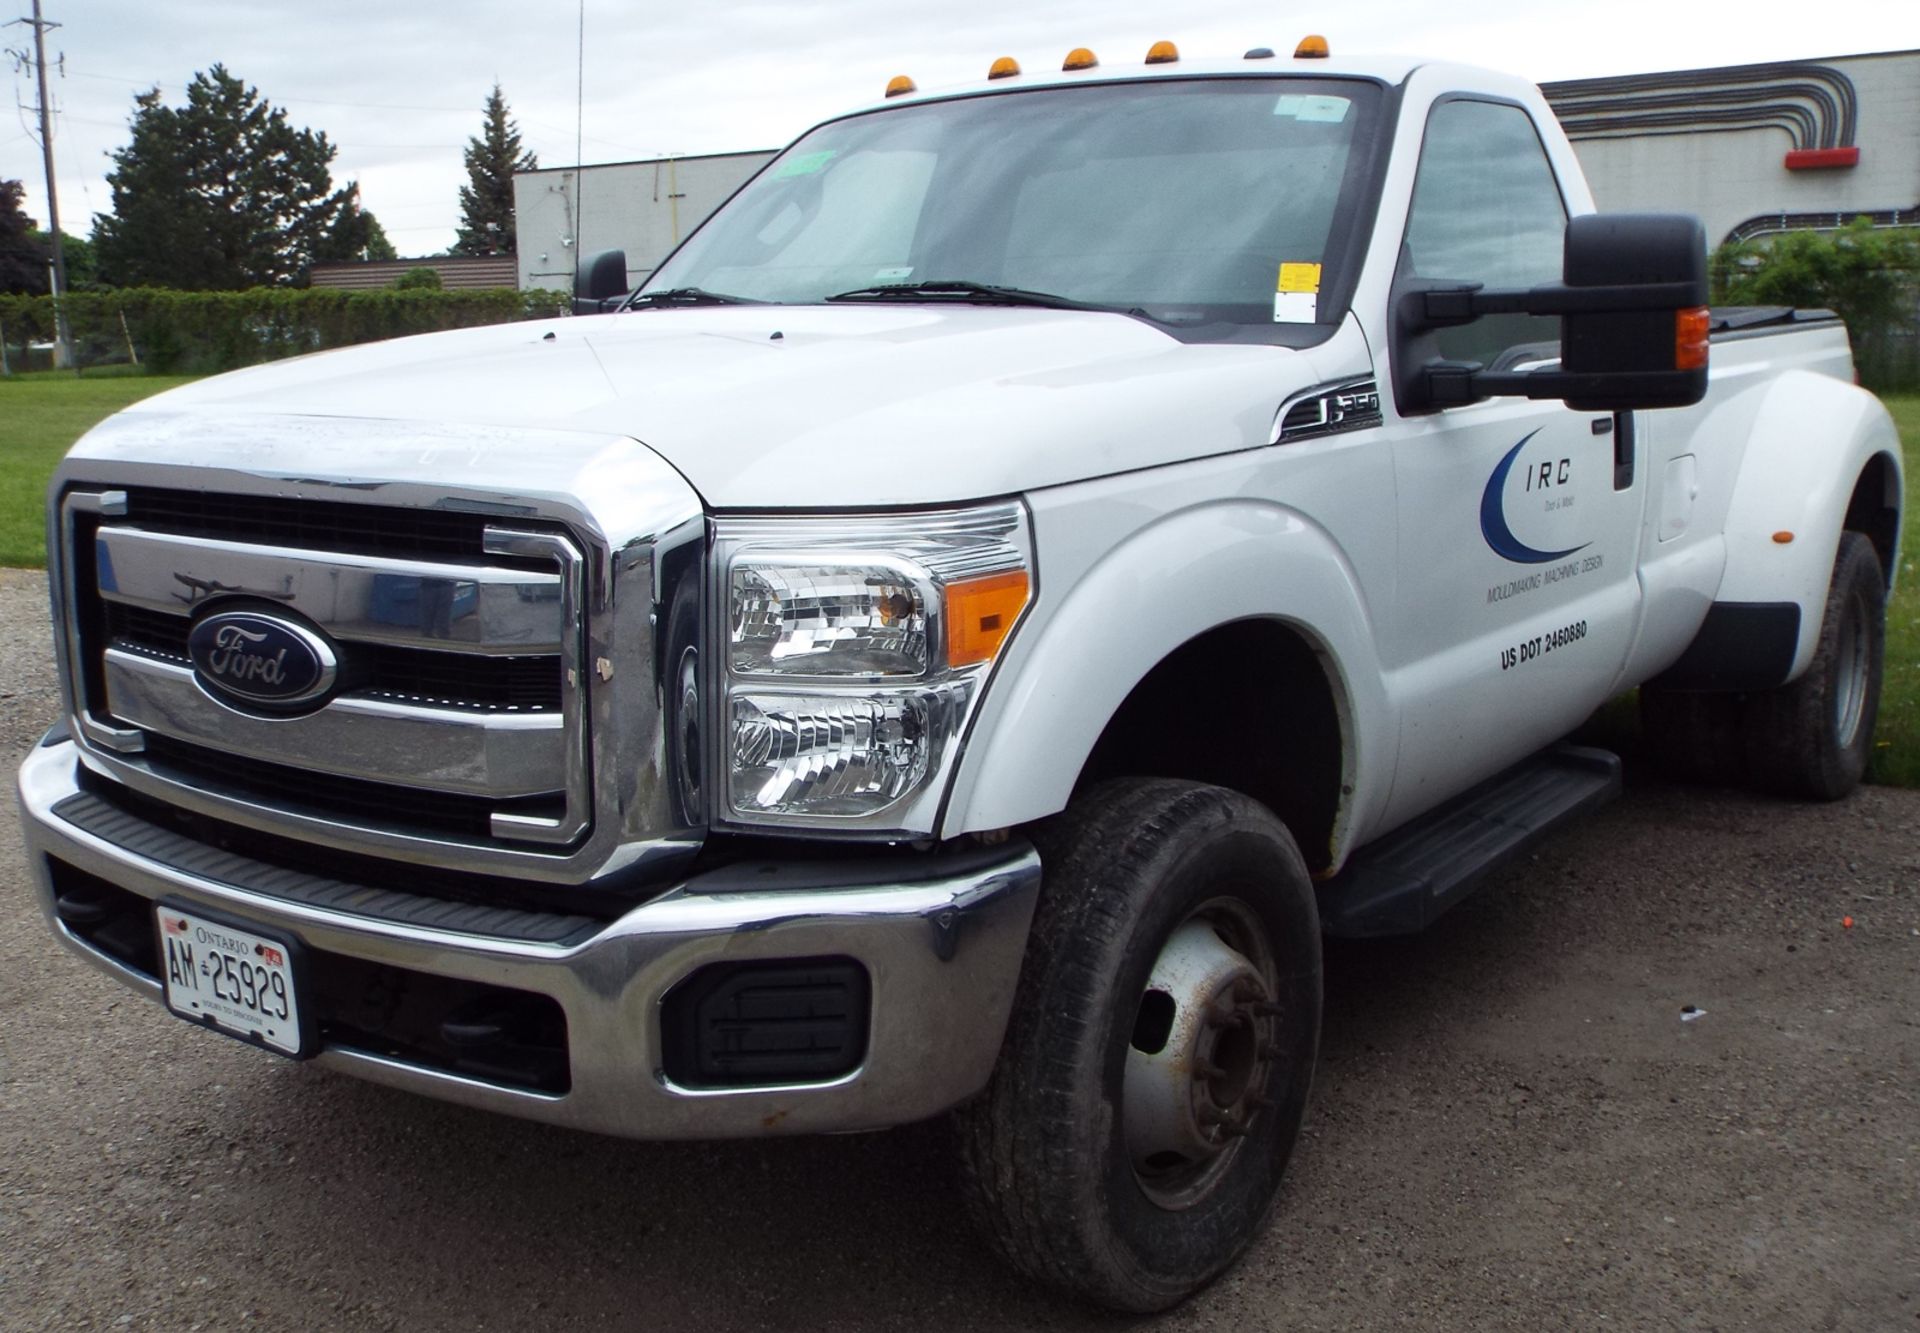 FORD (2012) F-350 XLT SUPERDUTY 2 DOOR DUALLY PICKUP TRUCK WITH 6.2 LITRE V8 ENGINE, AUTOMATIC - Image 2 of 7